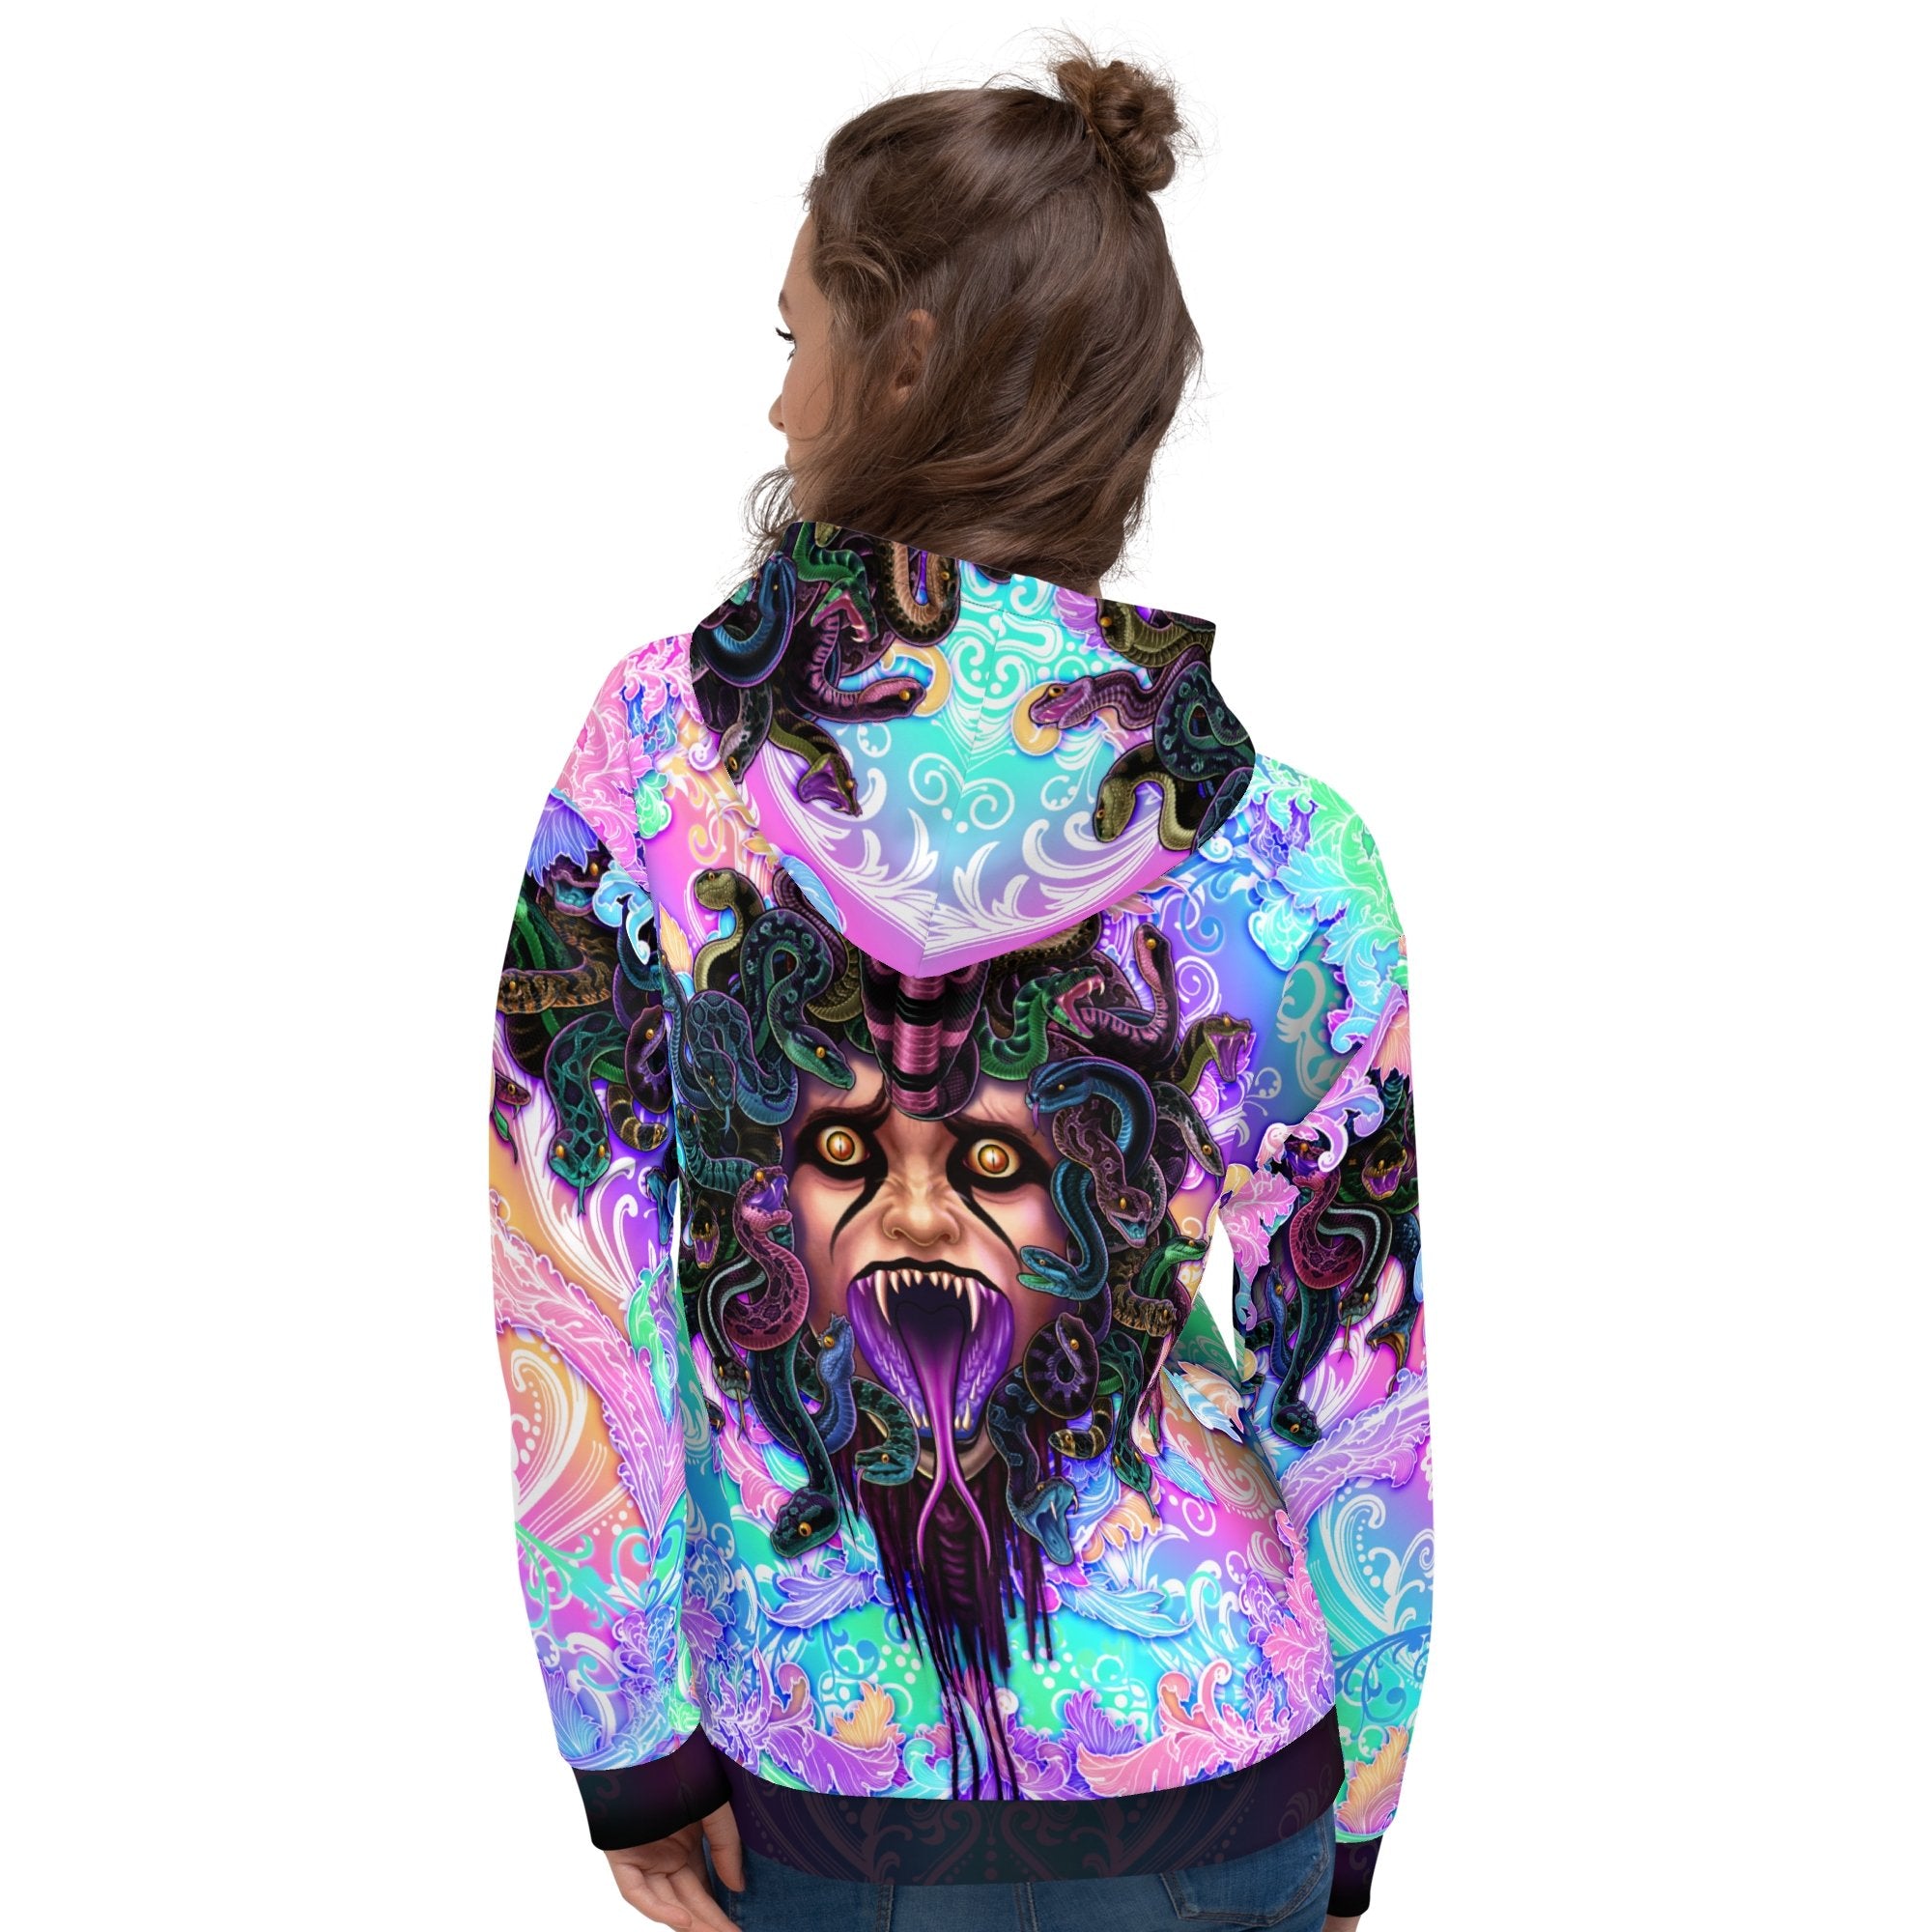 Psychedelic Hoodie, Aesthetic Streetwear, Rave Outfit, Holographic and Trippy Festival Sweater, Pastel Punk Black Clothing, Unisex - Medusa - Abysm Internal